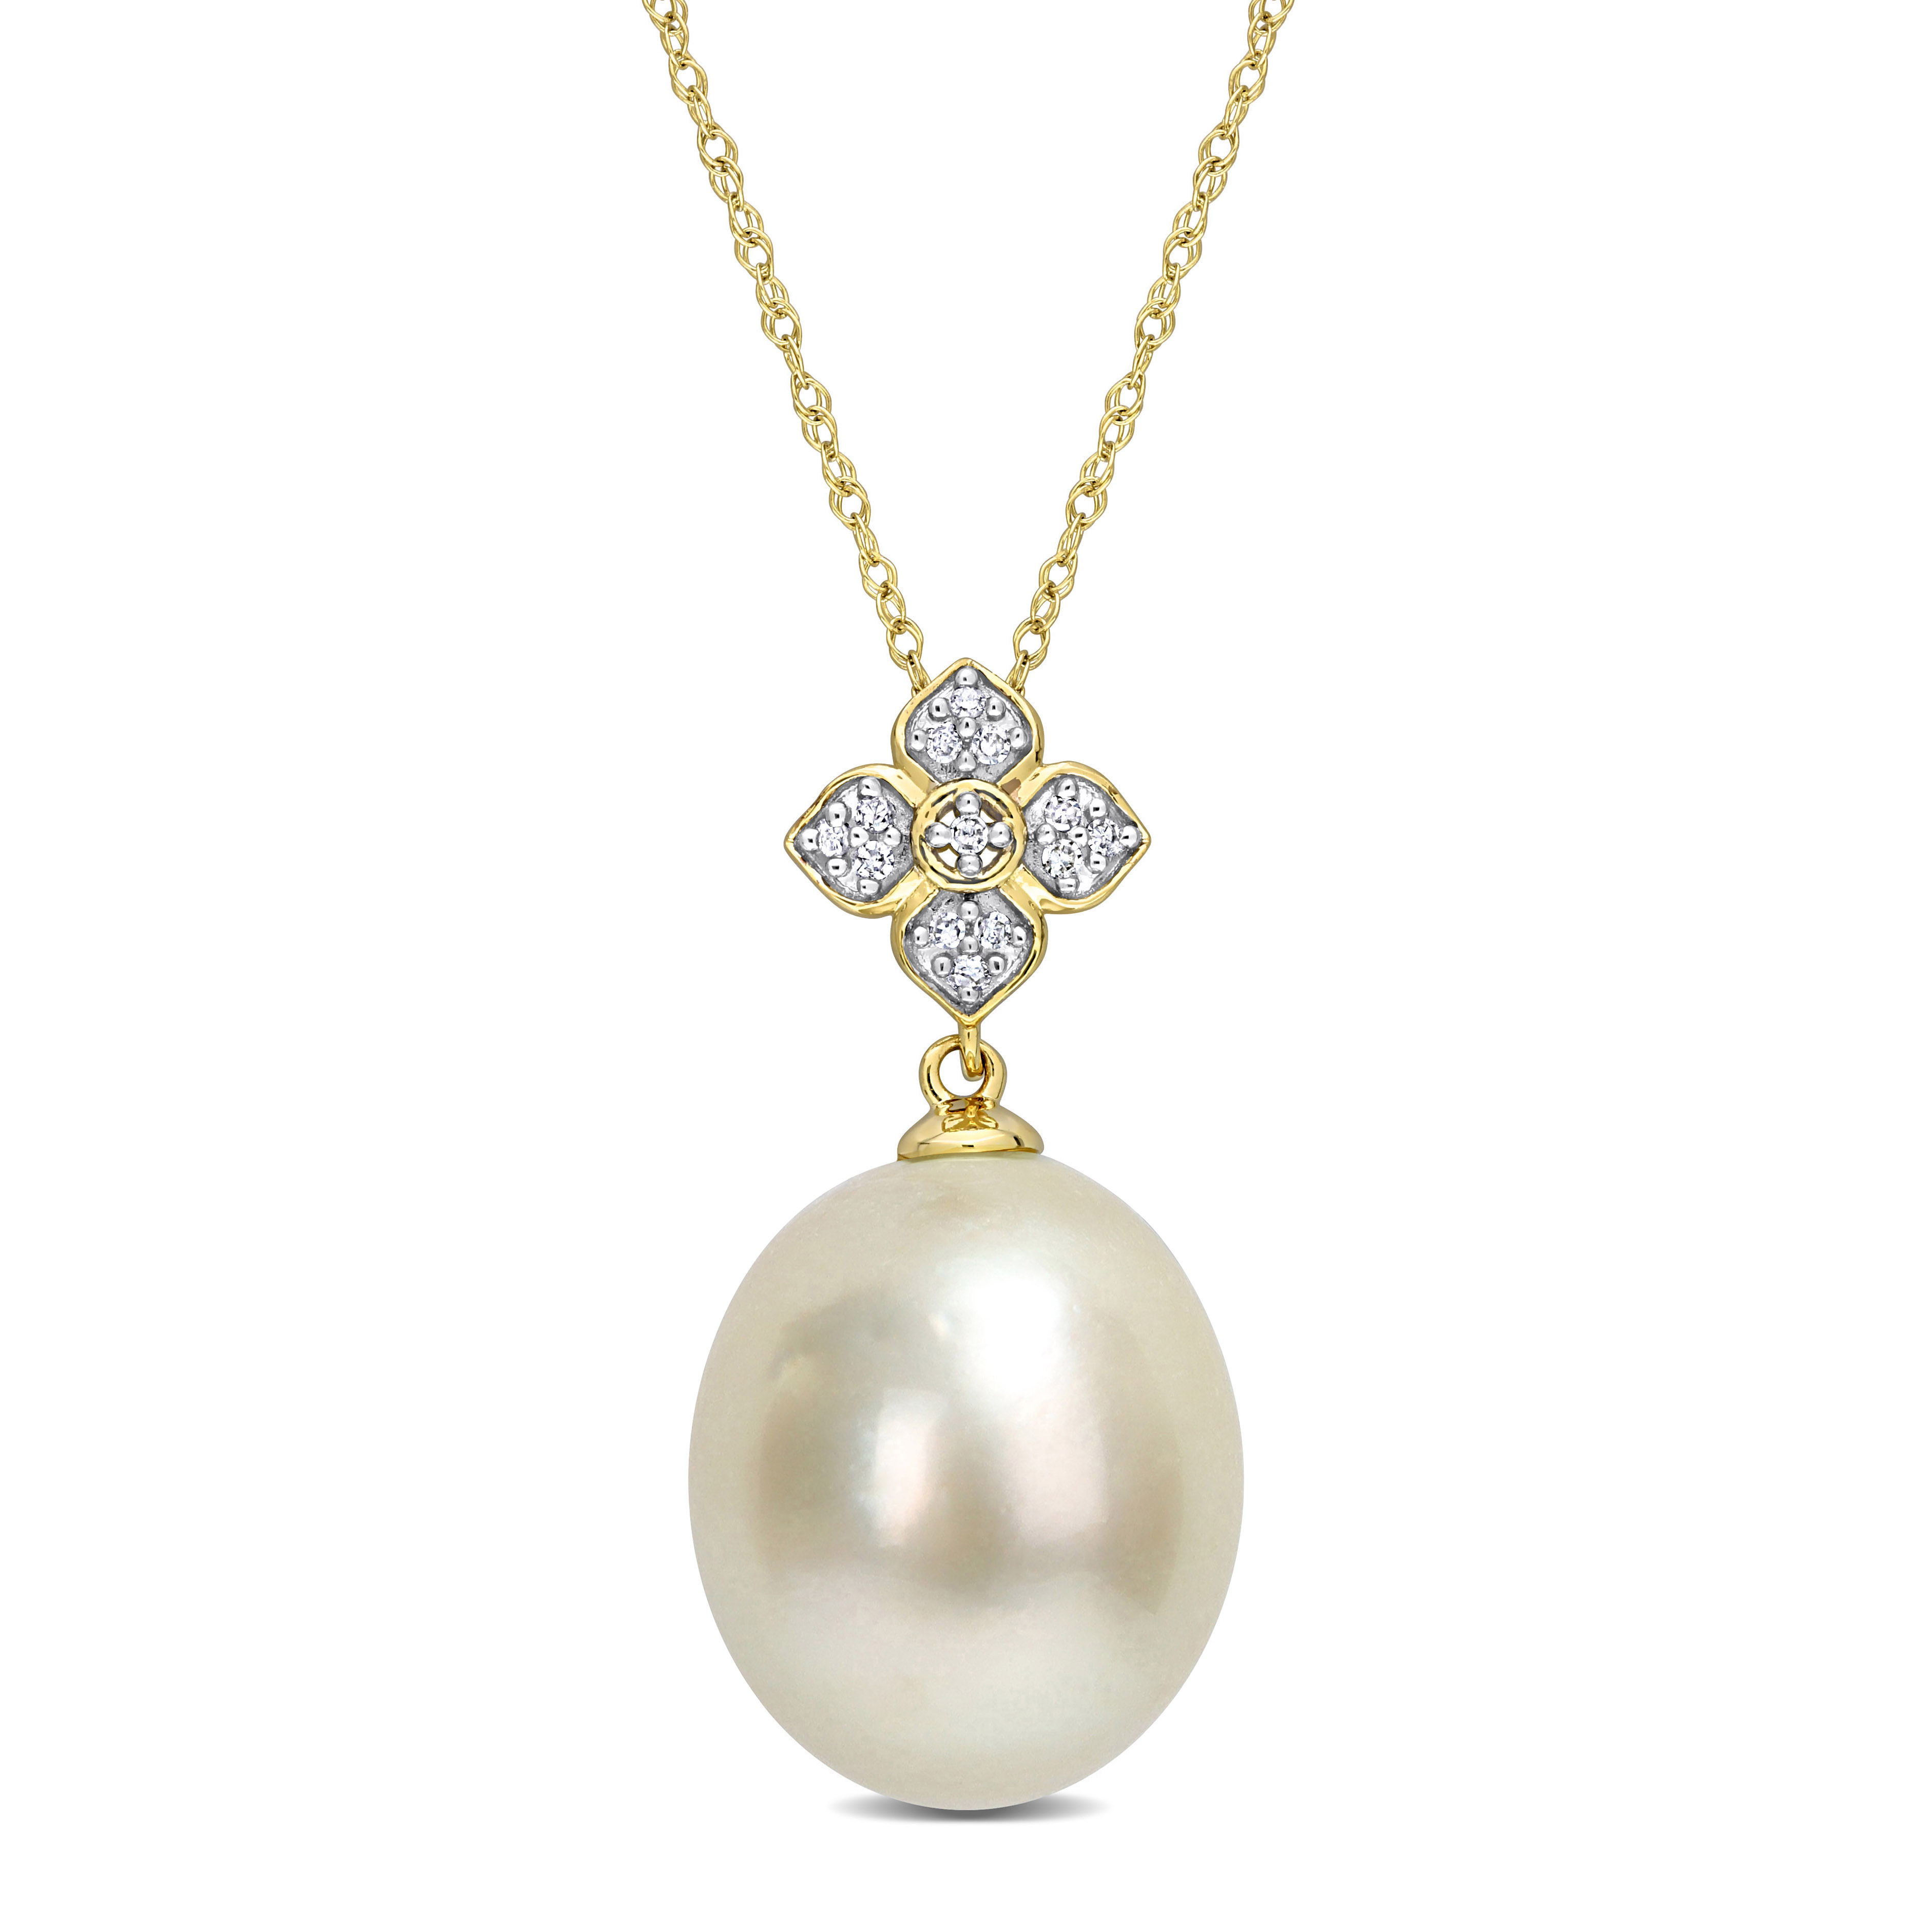 12-13 MM South Sea Cultured Pearl and Diamond Accent Floral Pendant with Chain in 10k Yellow Gold